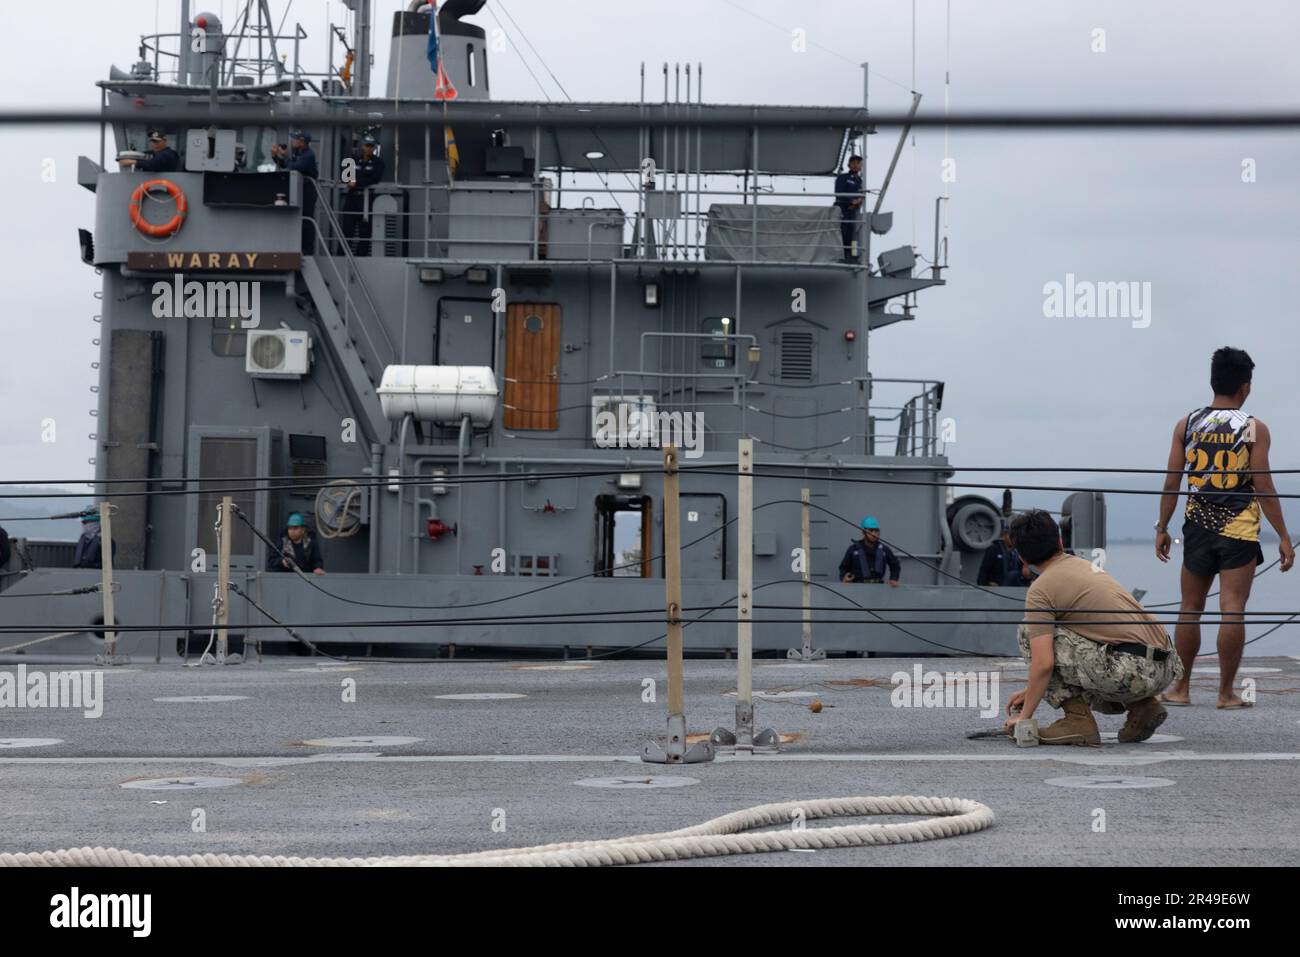 A U.S. Navy Sailor watches from a Navy Roll-On/Roll-Off Discharge Facility as Philippine BRP Waray LC-288 moors next to it during a combined joint logistics over-the-shore offload in preparation for Balikatan 23 at Camp Agnew, Casiguran, Philippines, April 6, 2023. Balikatan is an annual exercise between the Armed Forces of the Philippines and U.S. military designed to strengthen bilateral interoperability, capabilities, trust, and cooperation built over decades shared experiences. Stock Photo